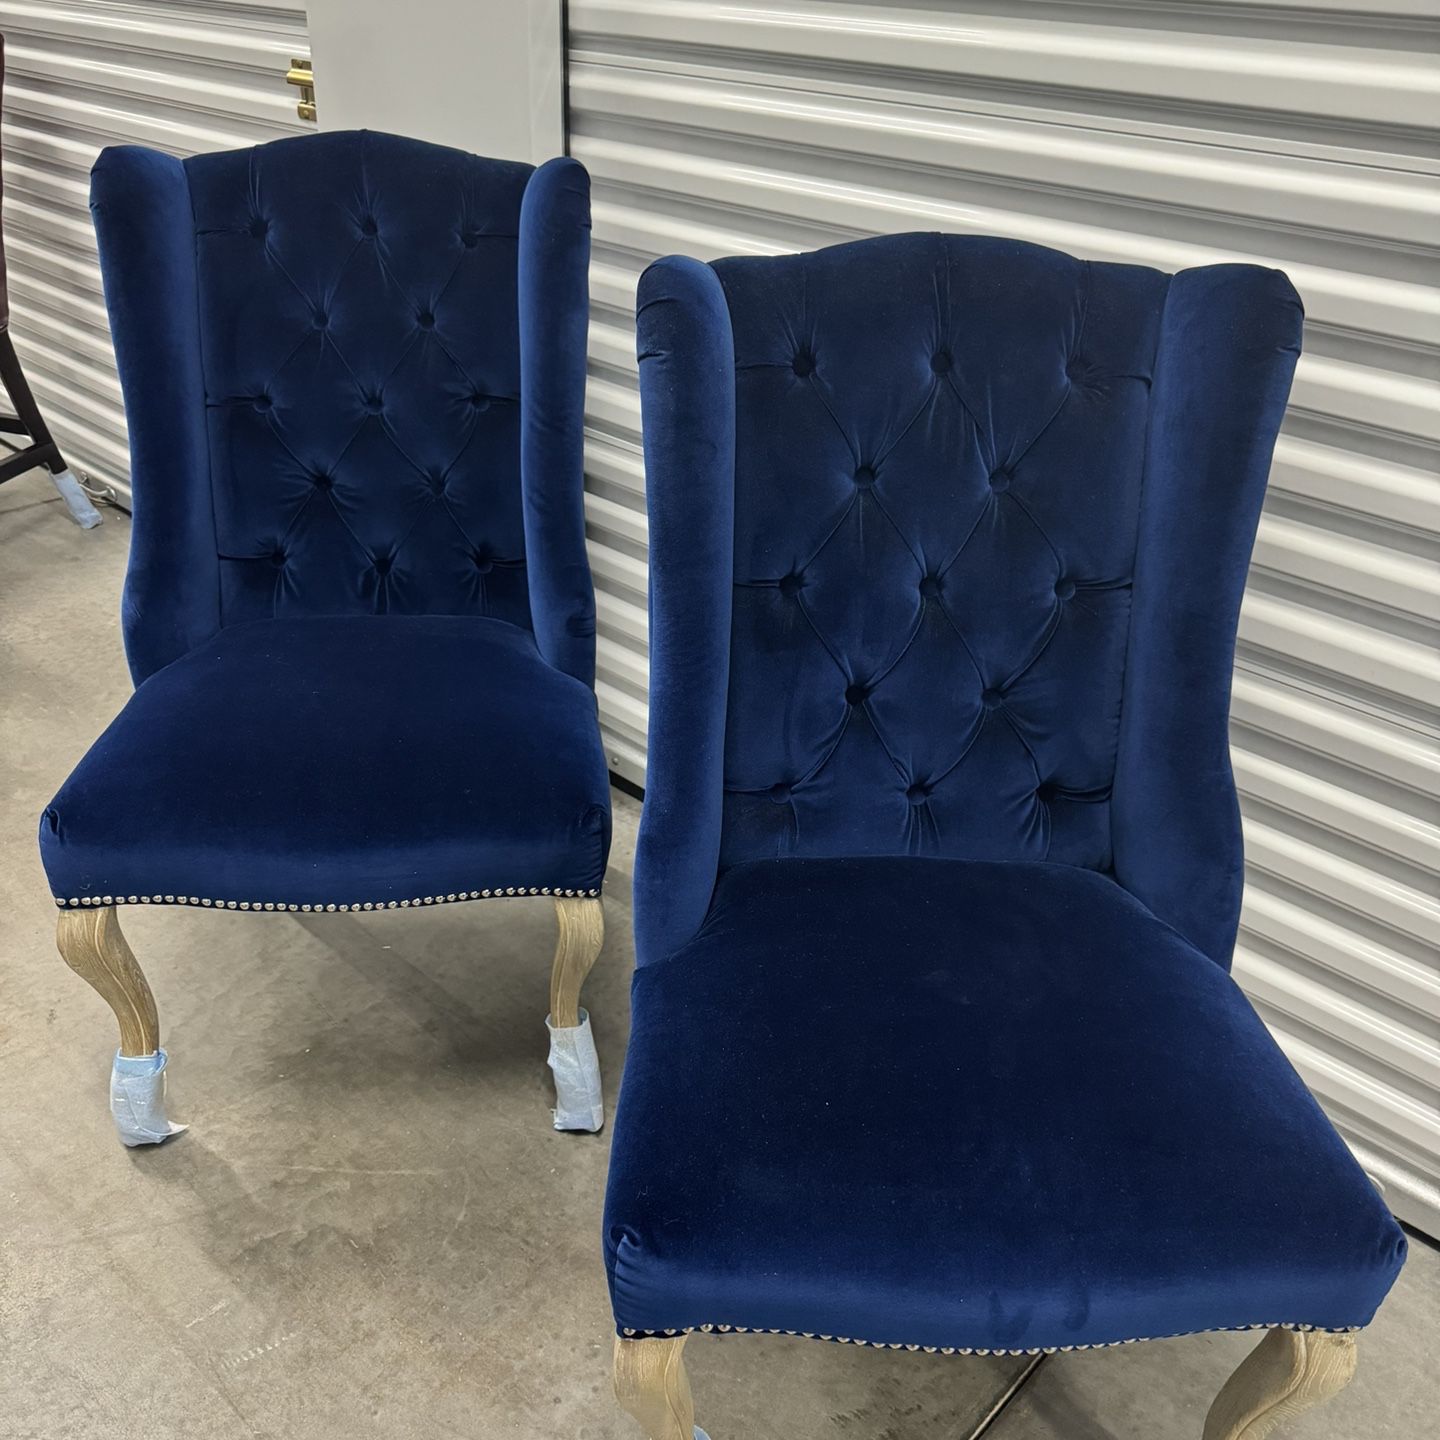 Accent Chairs (Z Gallerie)